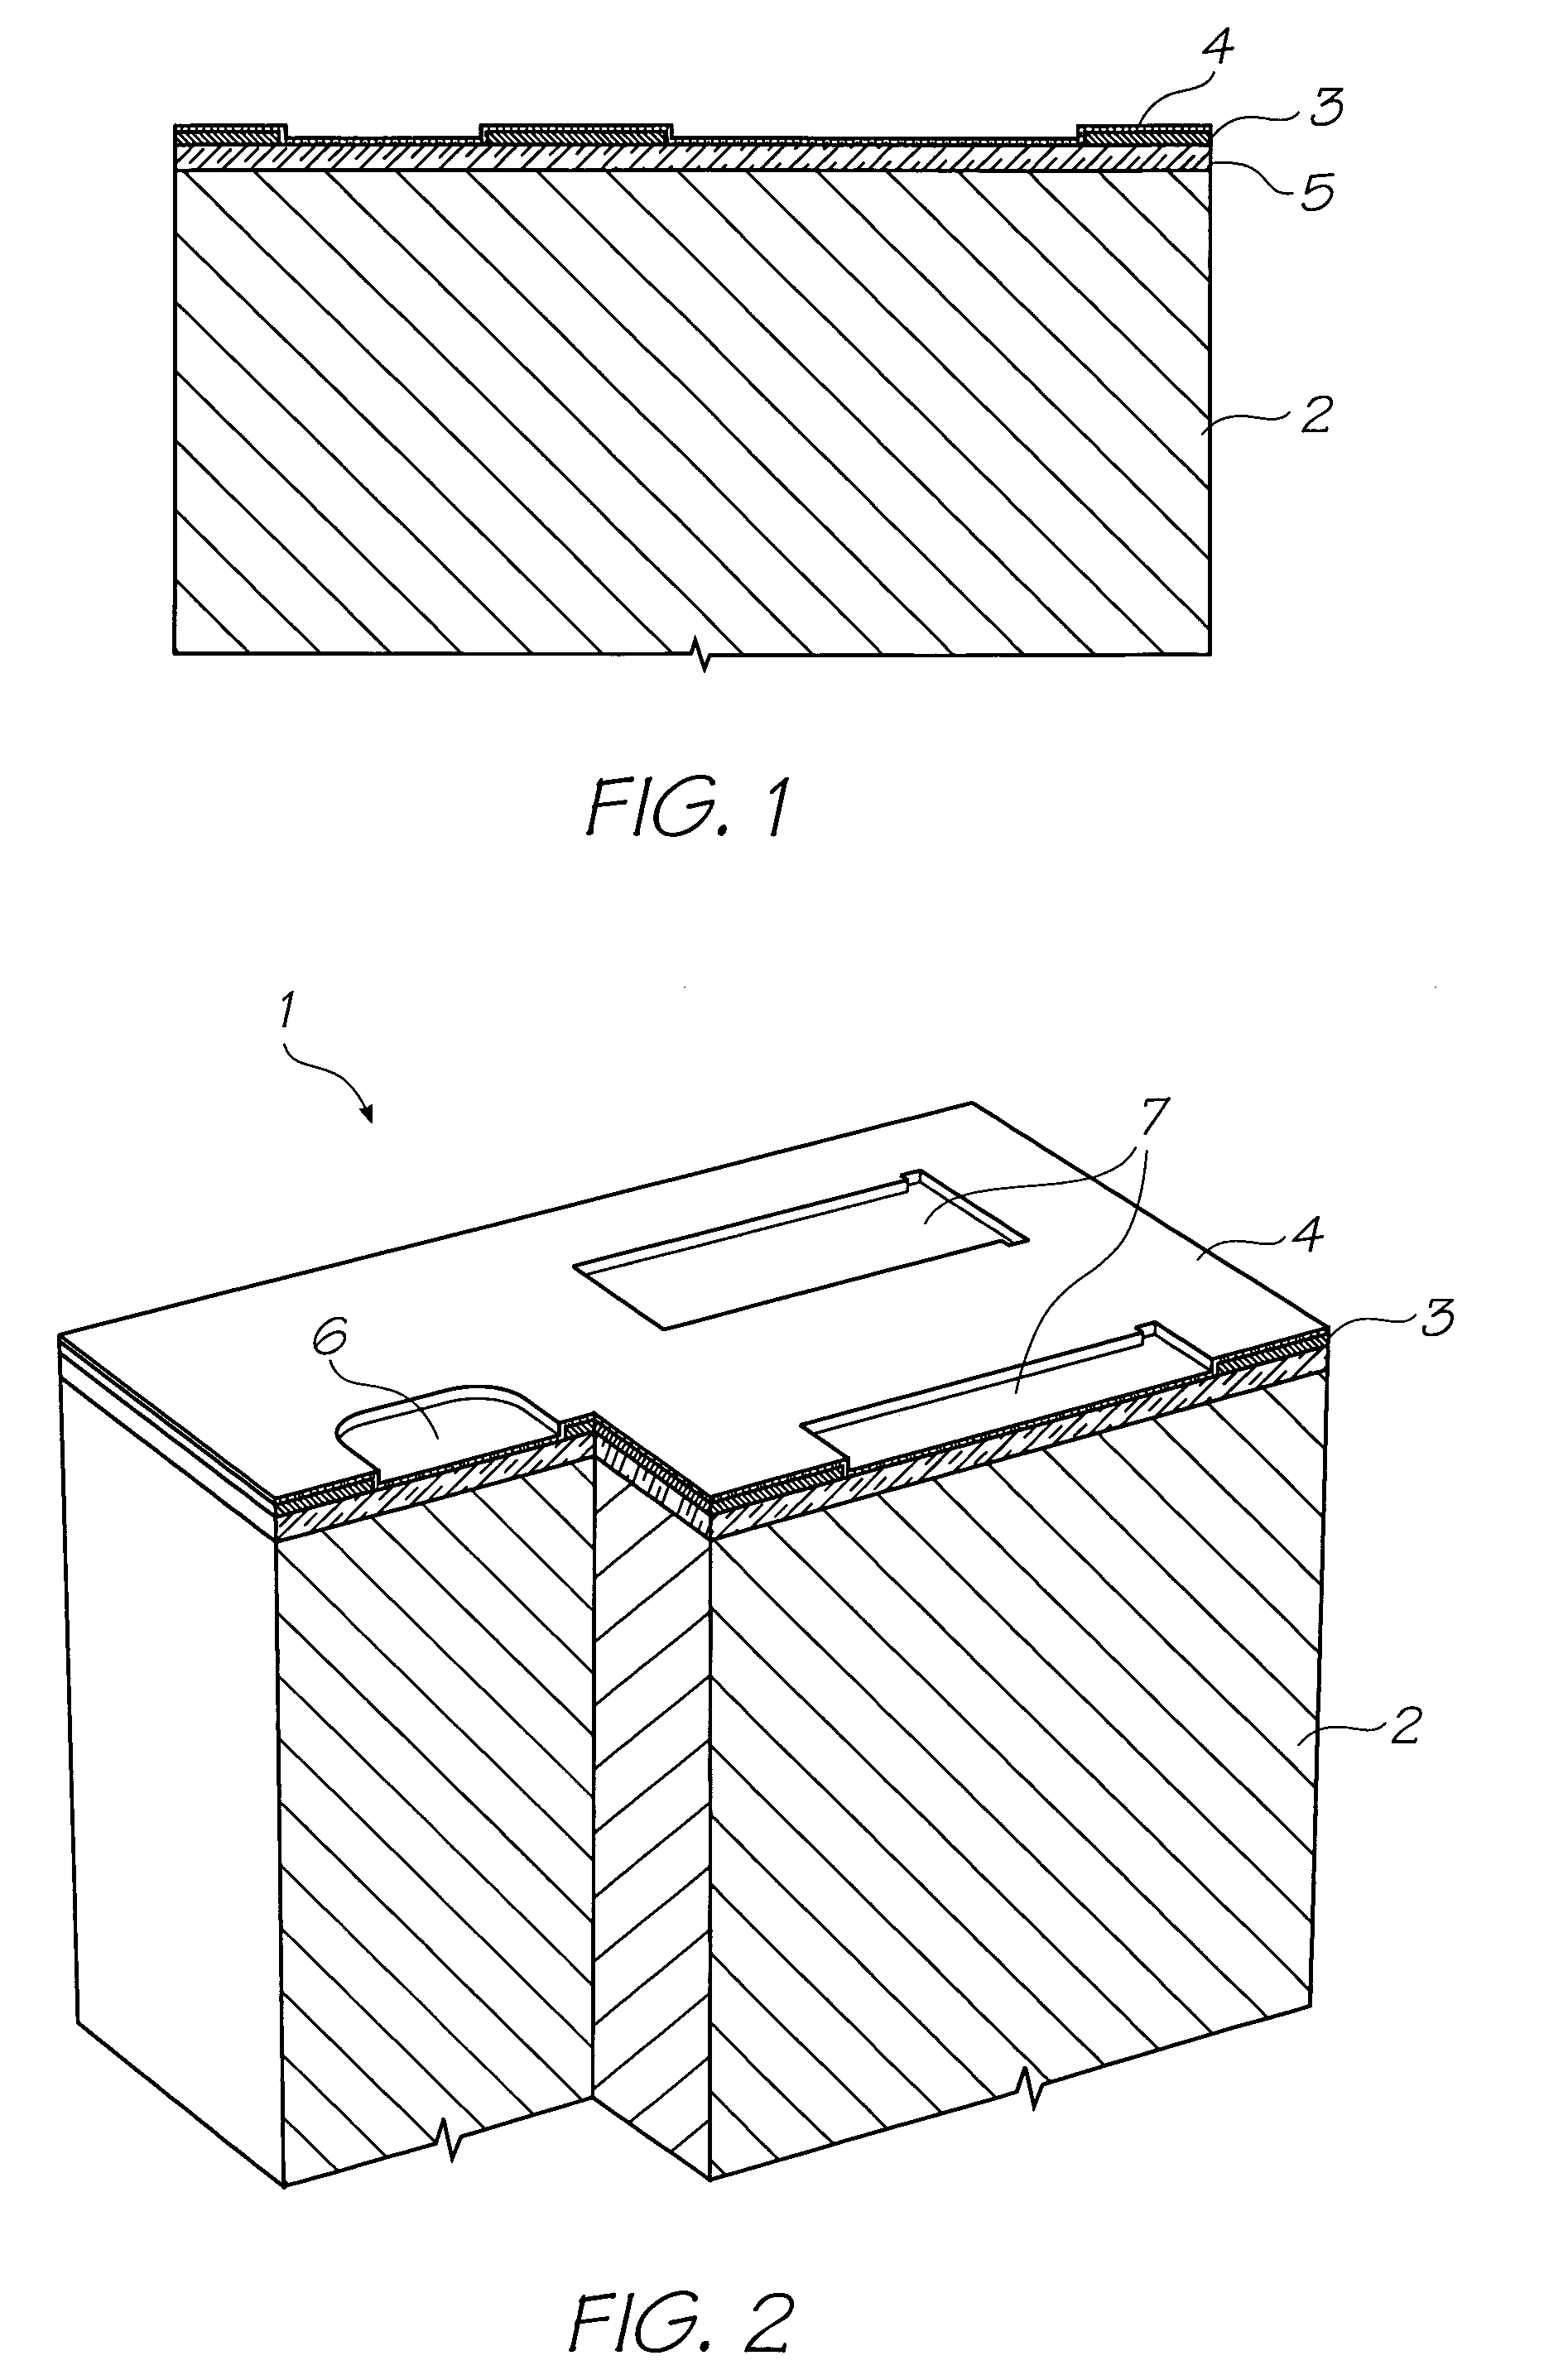 Method of fabricating inkjet nozzle chambers having filter structures